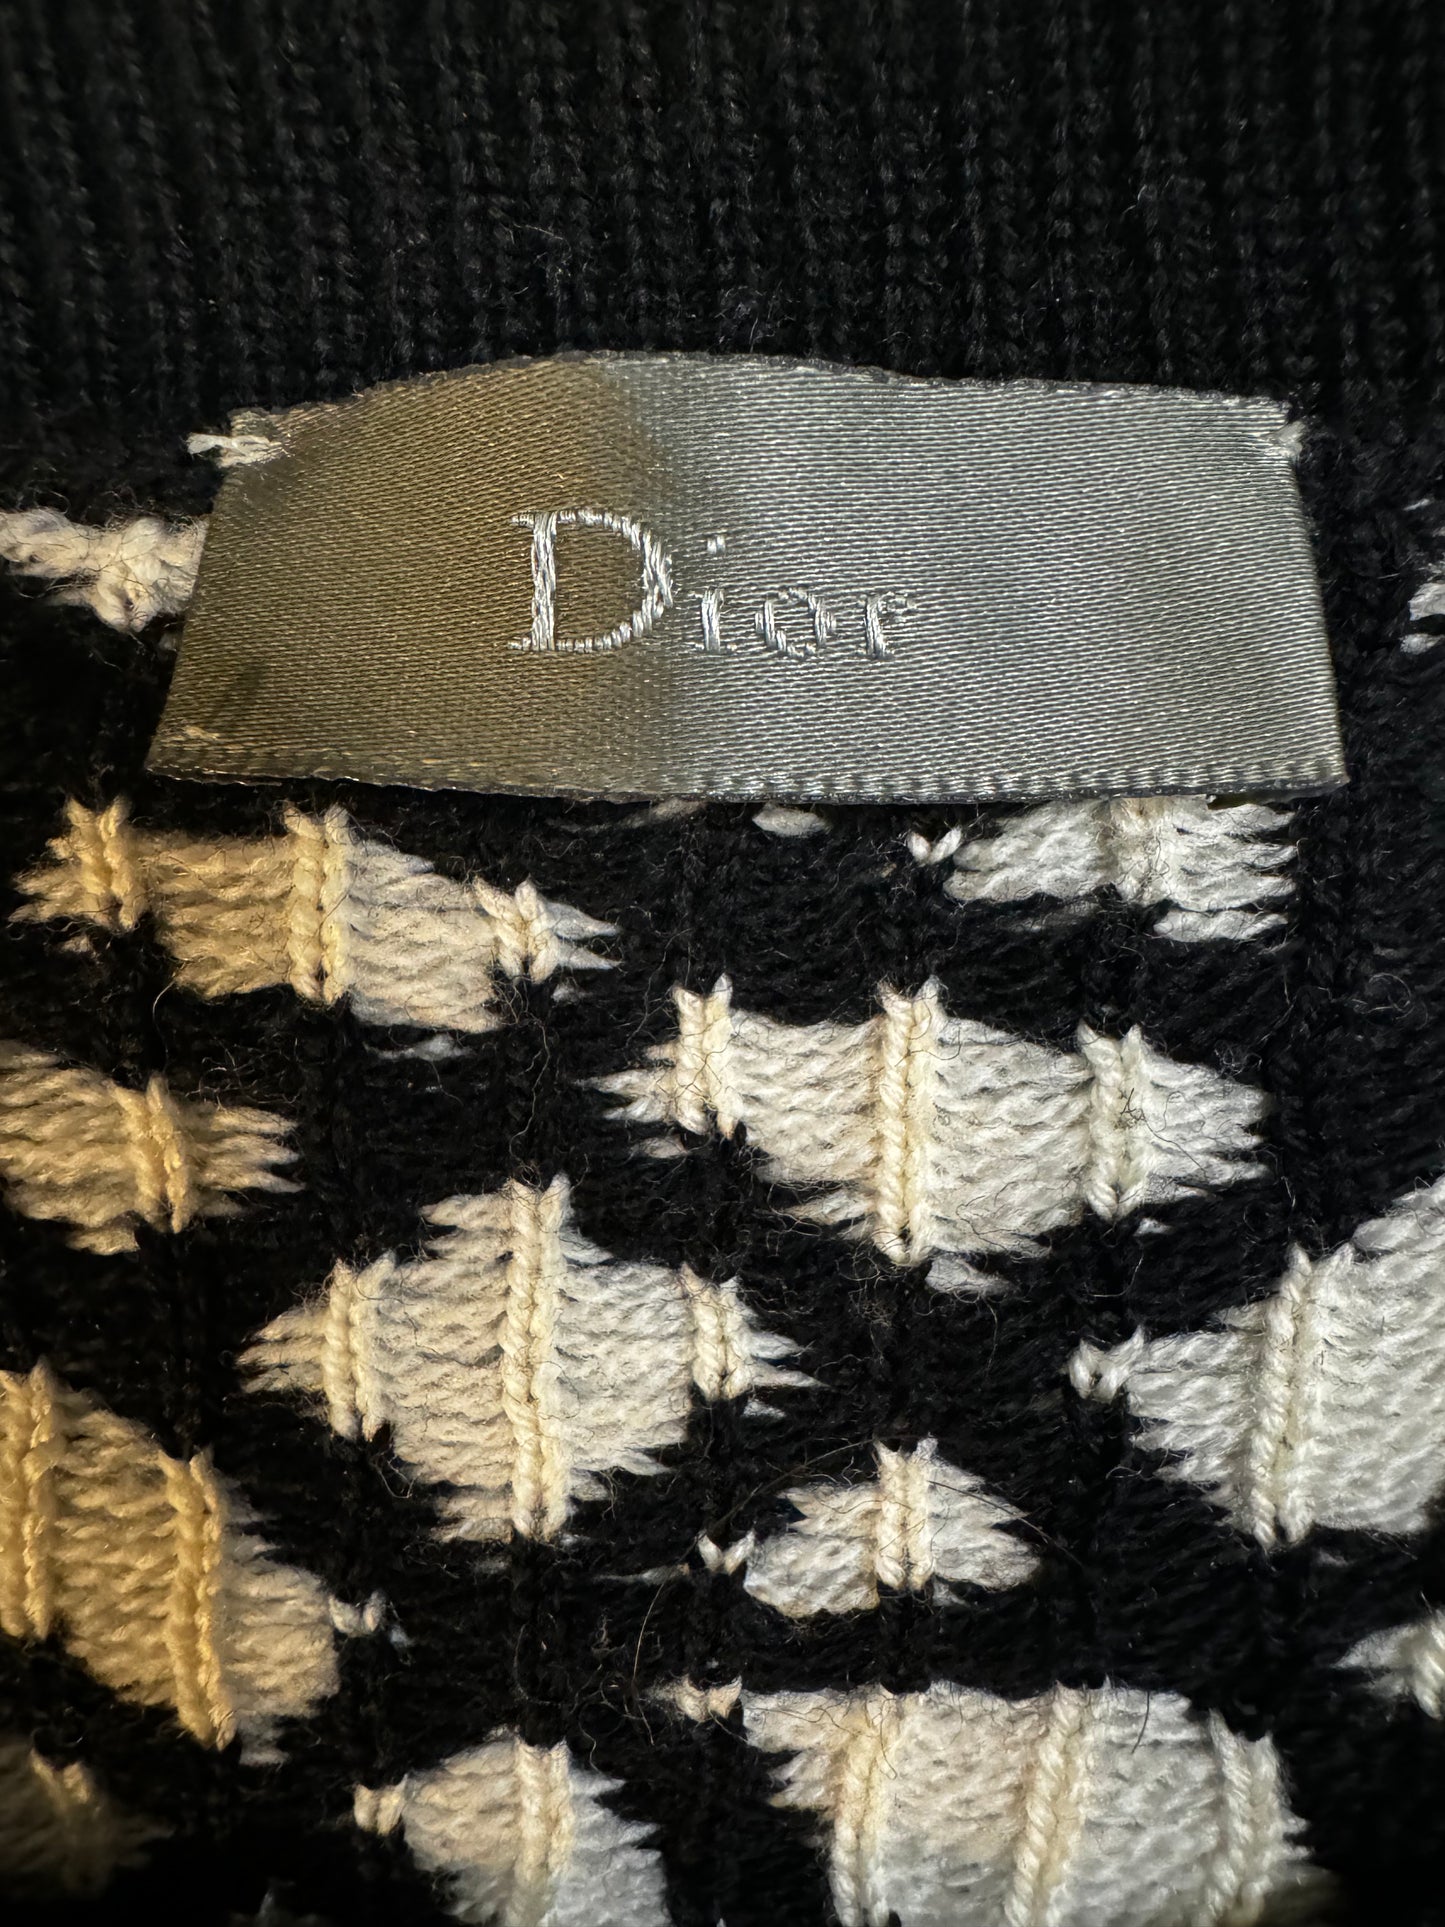 Dior Homme AW 2007 Navigate Sweater